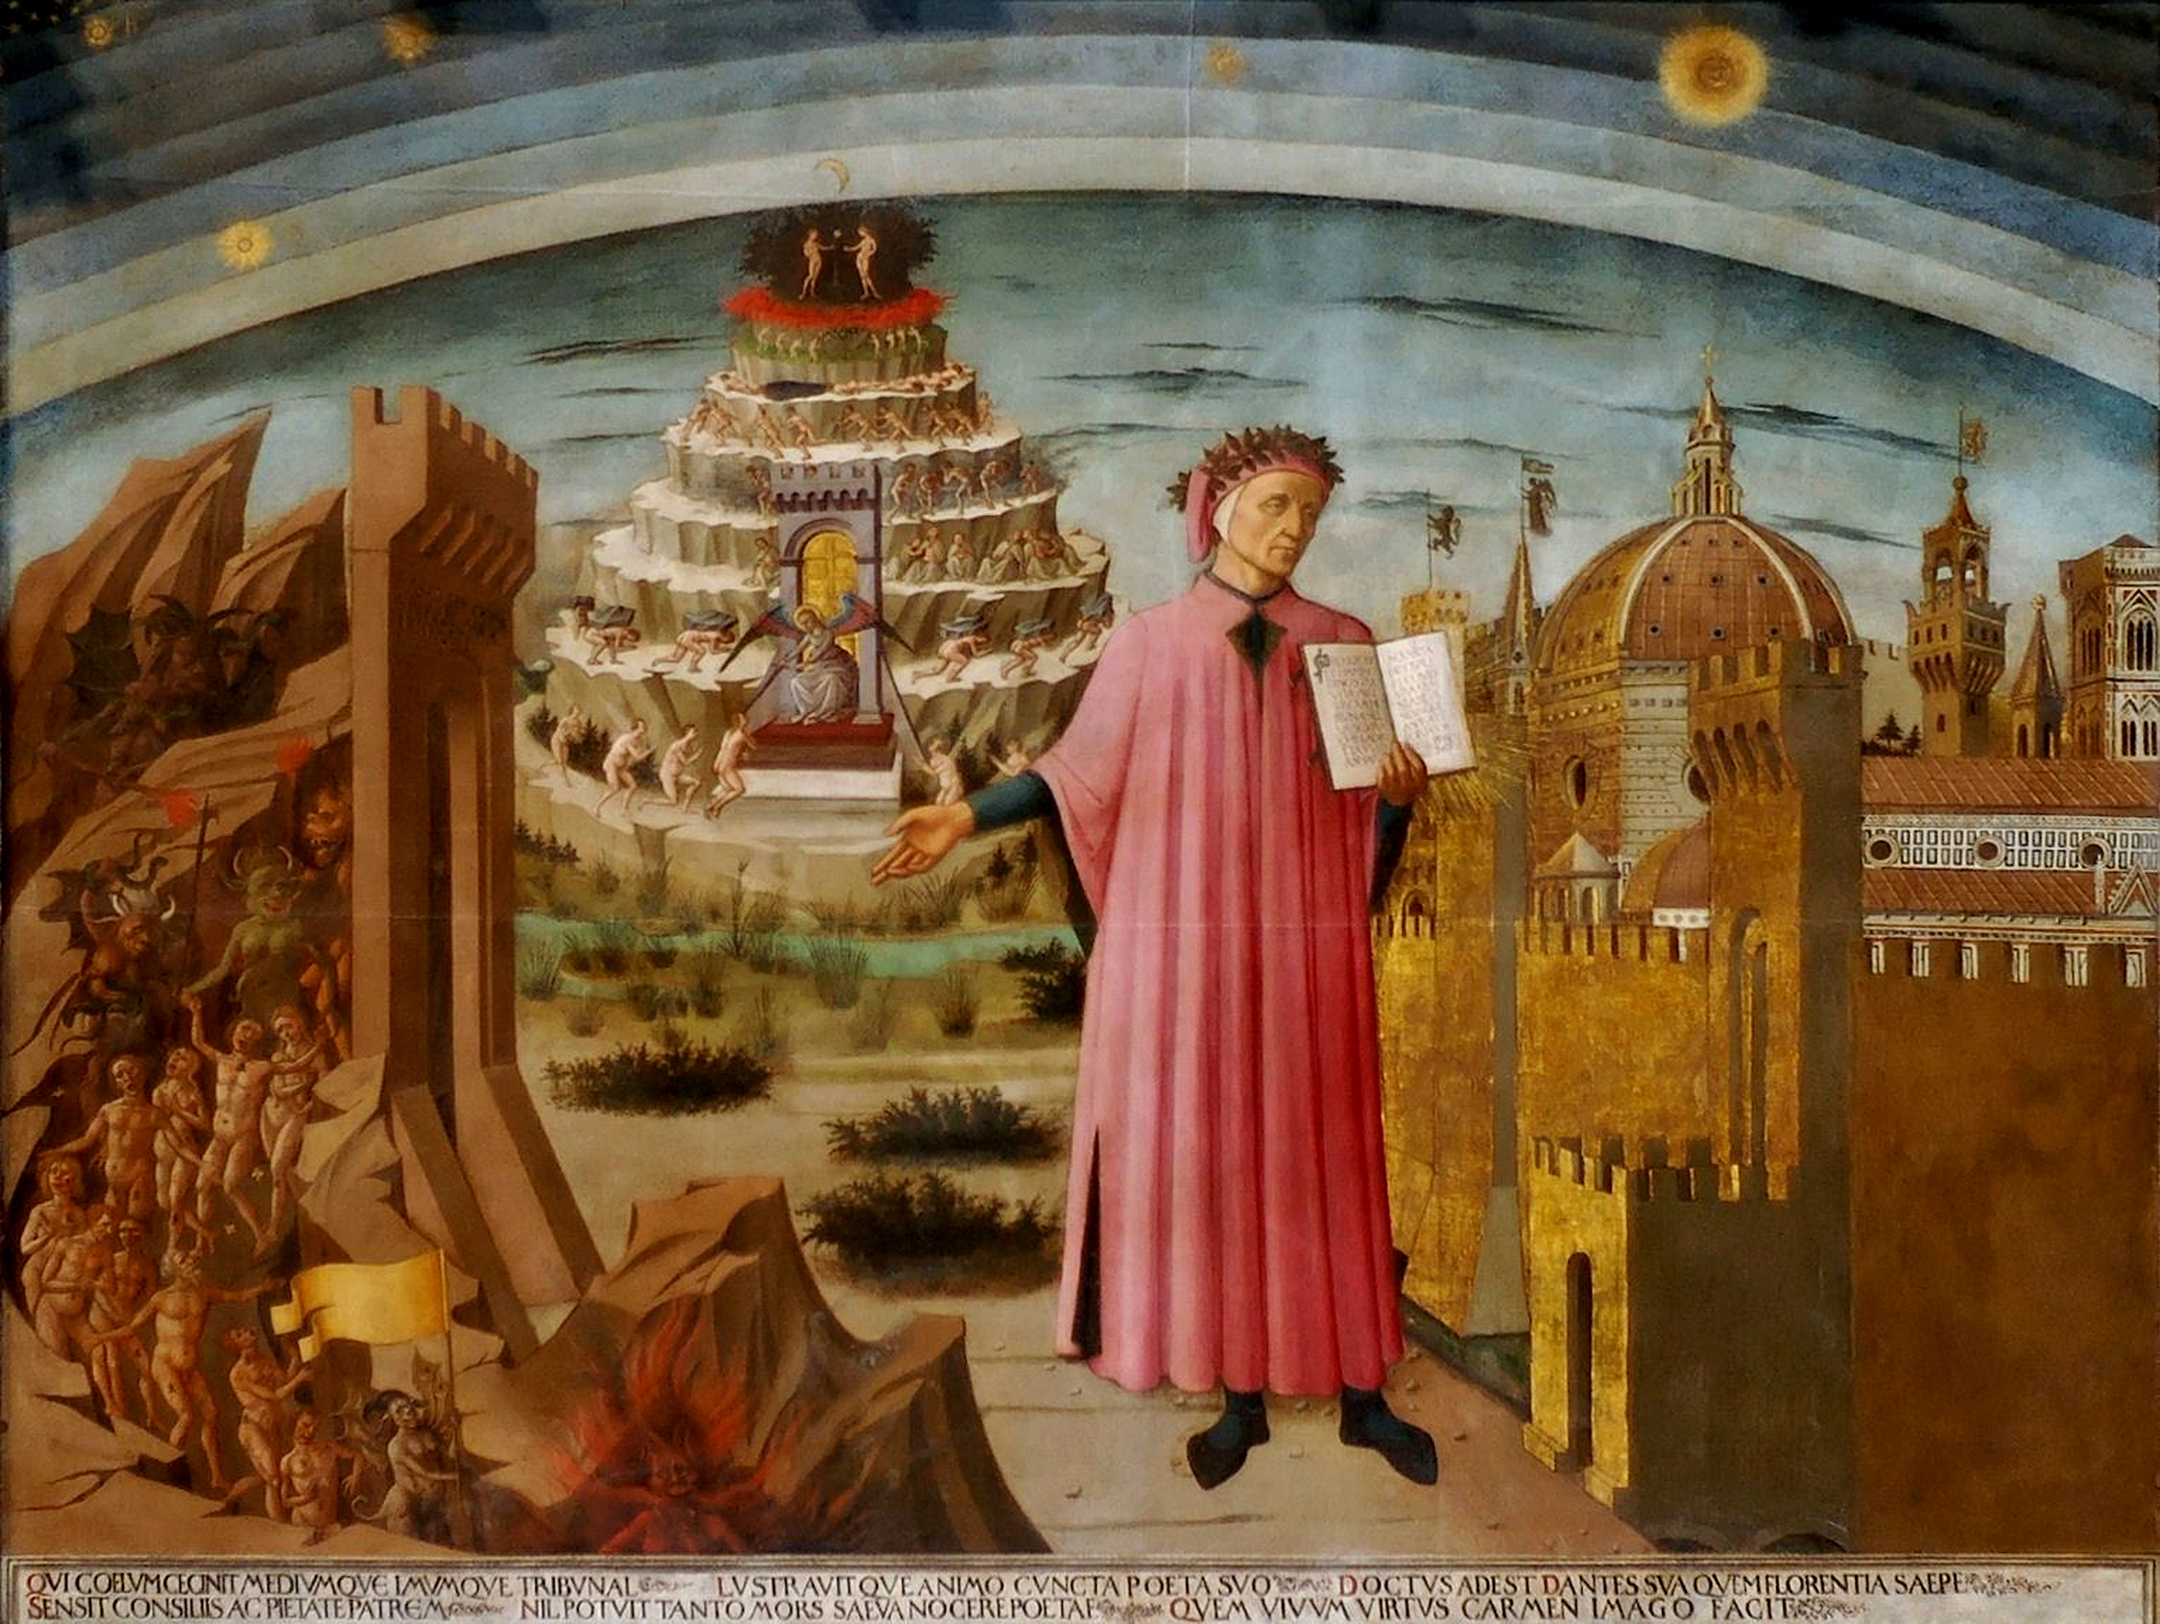 Painting of the poet Dante holding a book in front of a scene depicting Hell, Purgatory, and Paradise